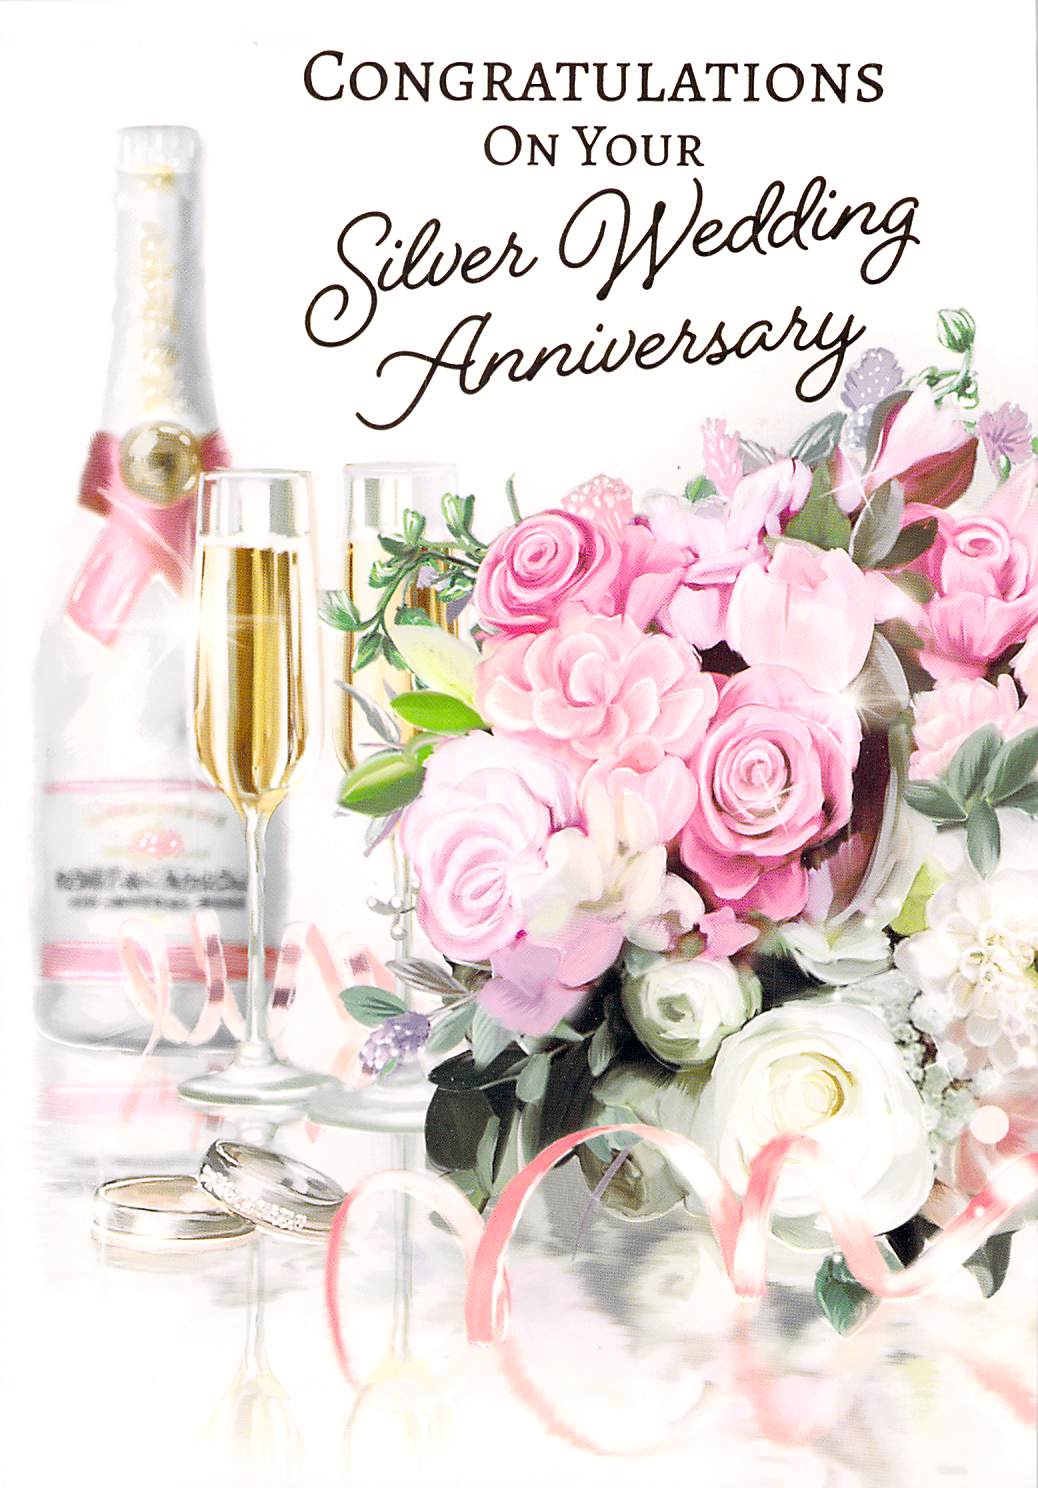 Silver Anniversary - Greeting Card - Roses / Champagne